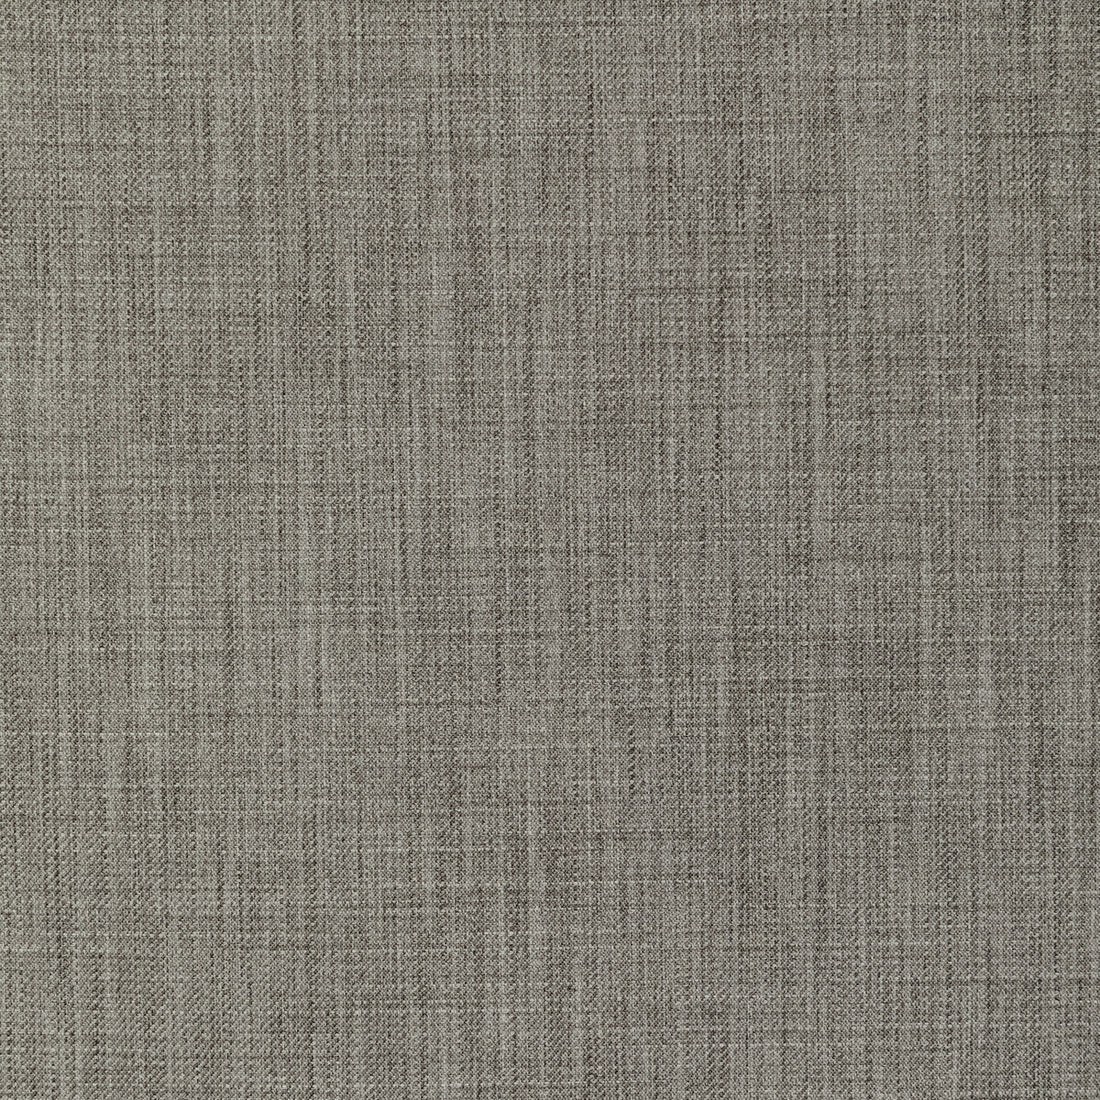 Kravet Smart fabric in 36293-1121 color - pattern 36293.1121.0 - by Kravet Smart in the Performance Crypton Home collection